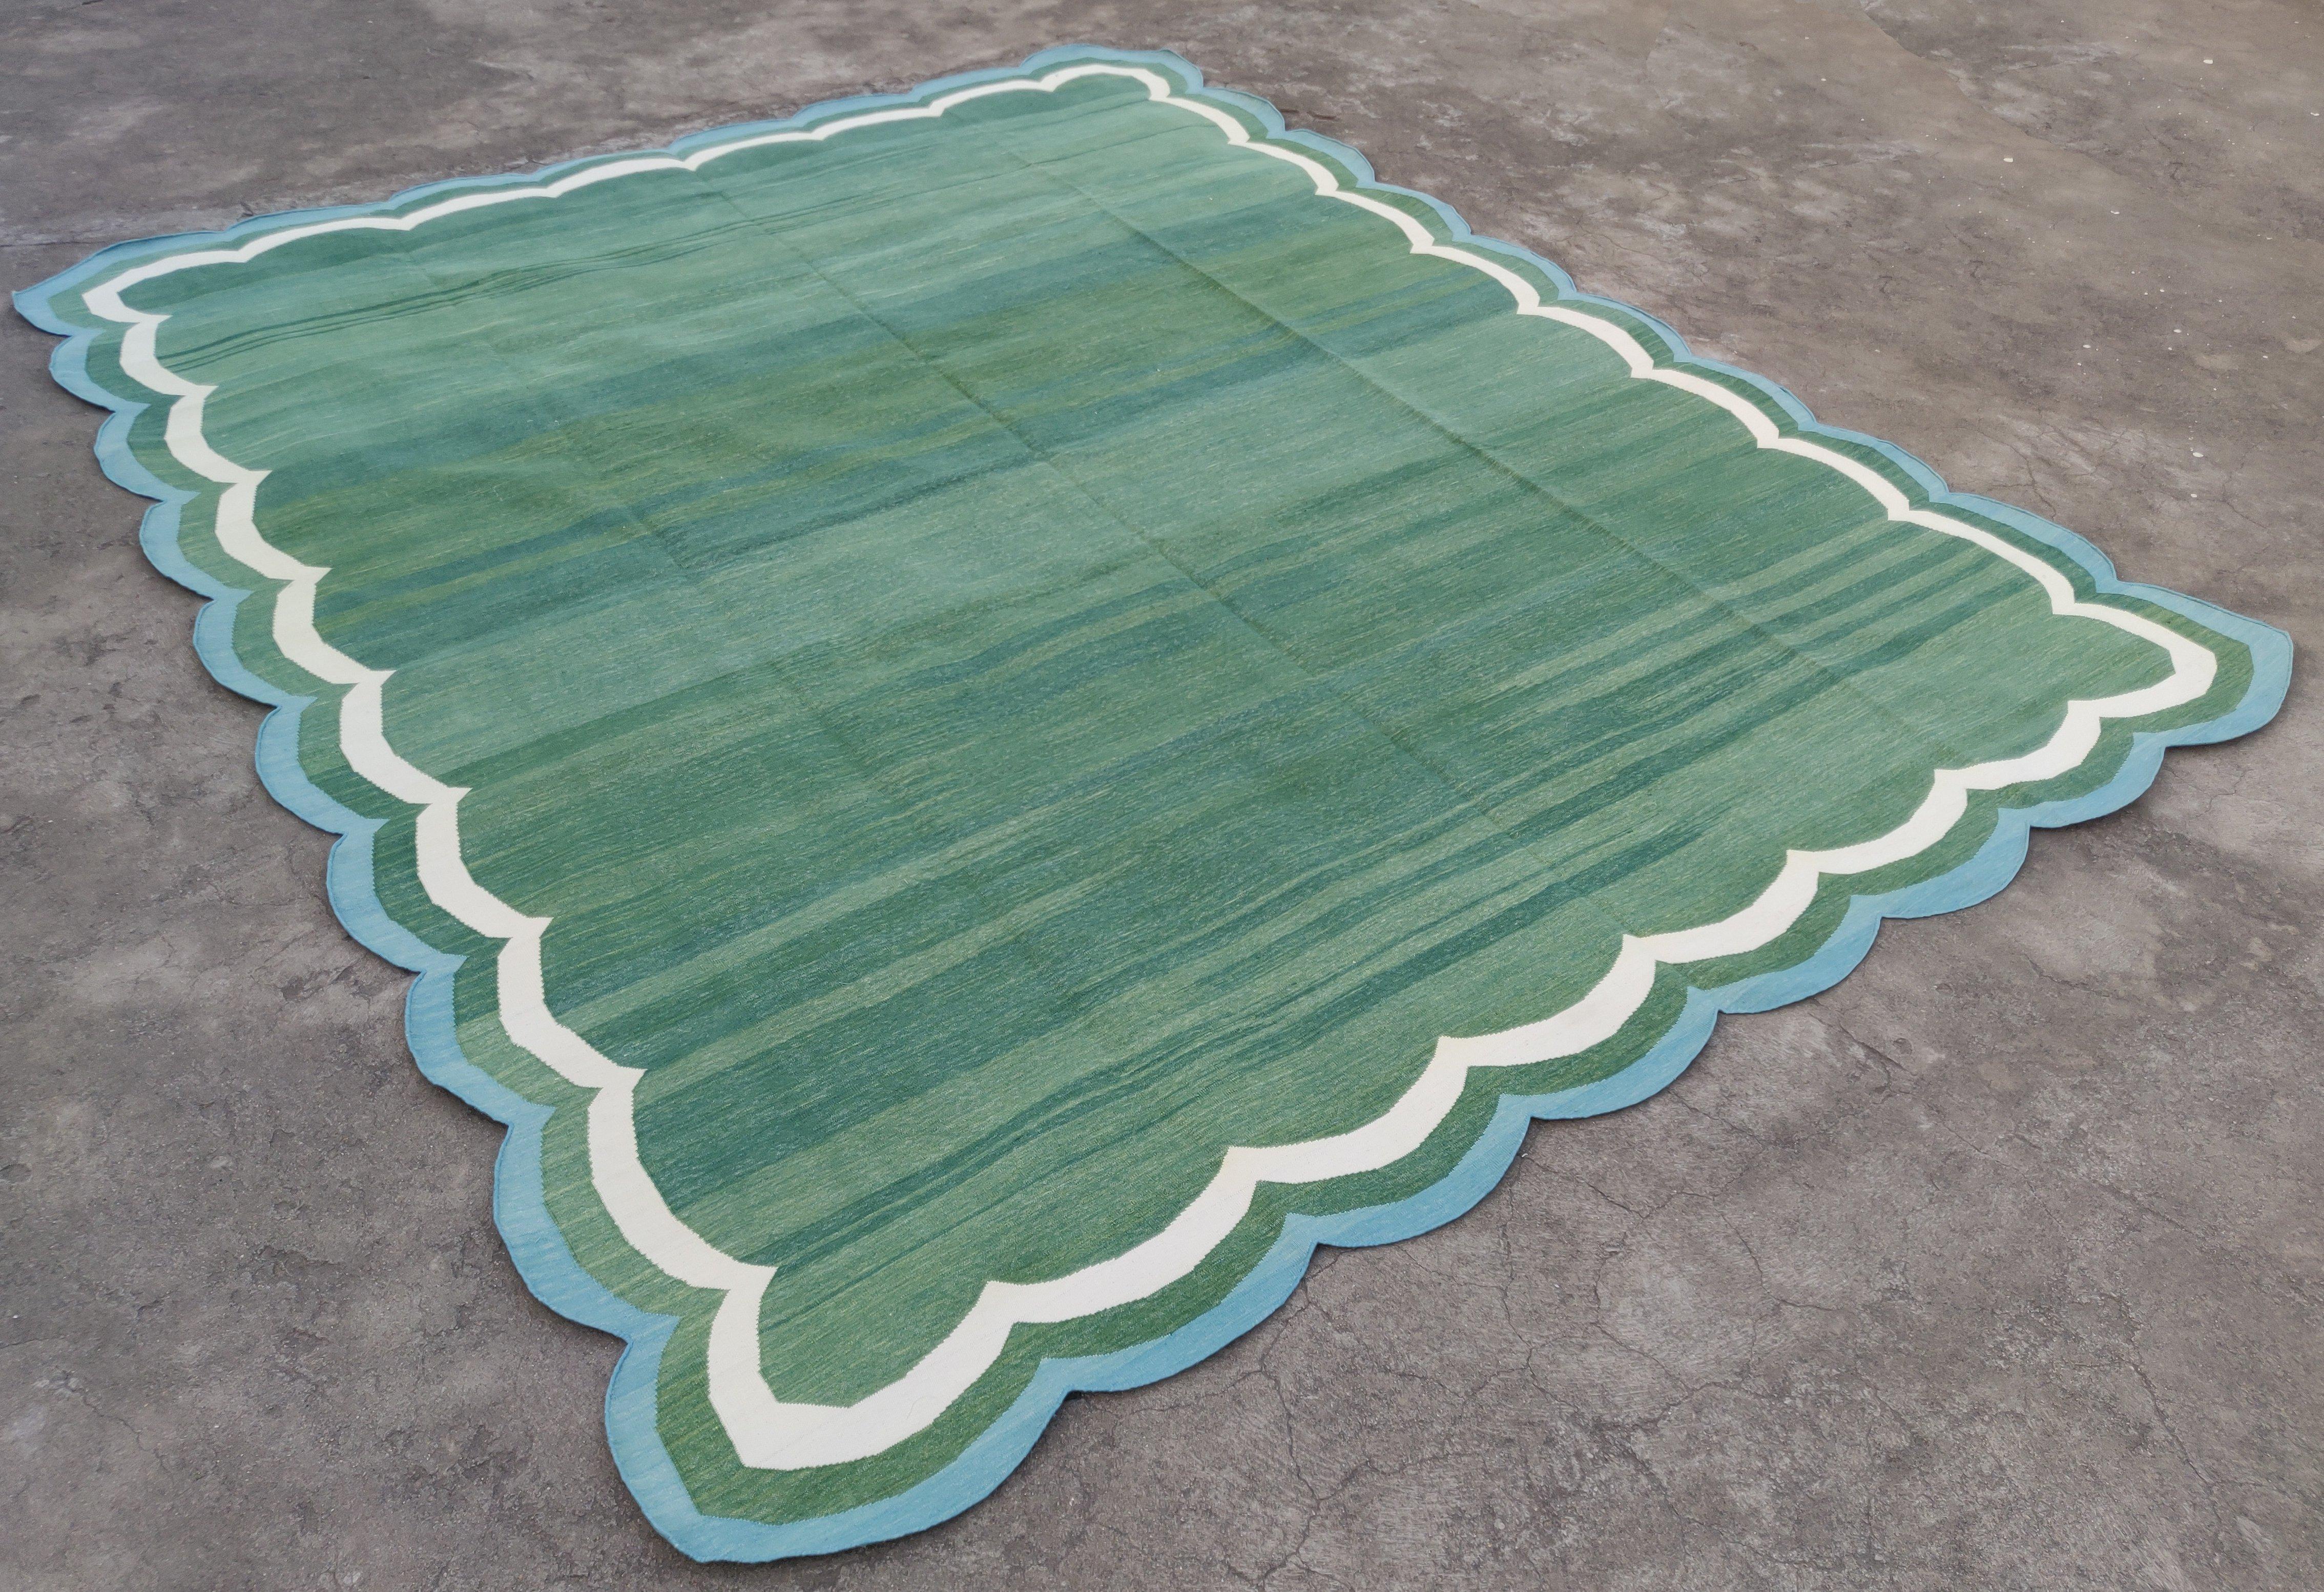 Cotton Vegetable Dyed Forest Green And Blue Scalloped Rug-8'x10'
These special flat-weave dhurries are hand-woven with 15 ply 100% cotton yarn. Due to the special manufacturing techniques used to create our rugs, the size and color of each piece may